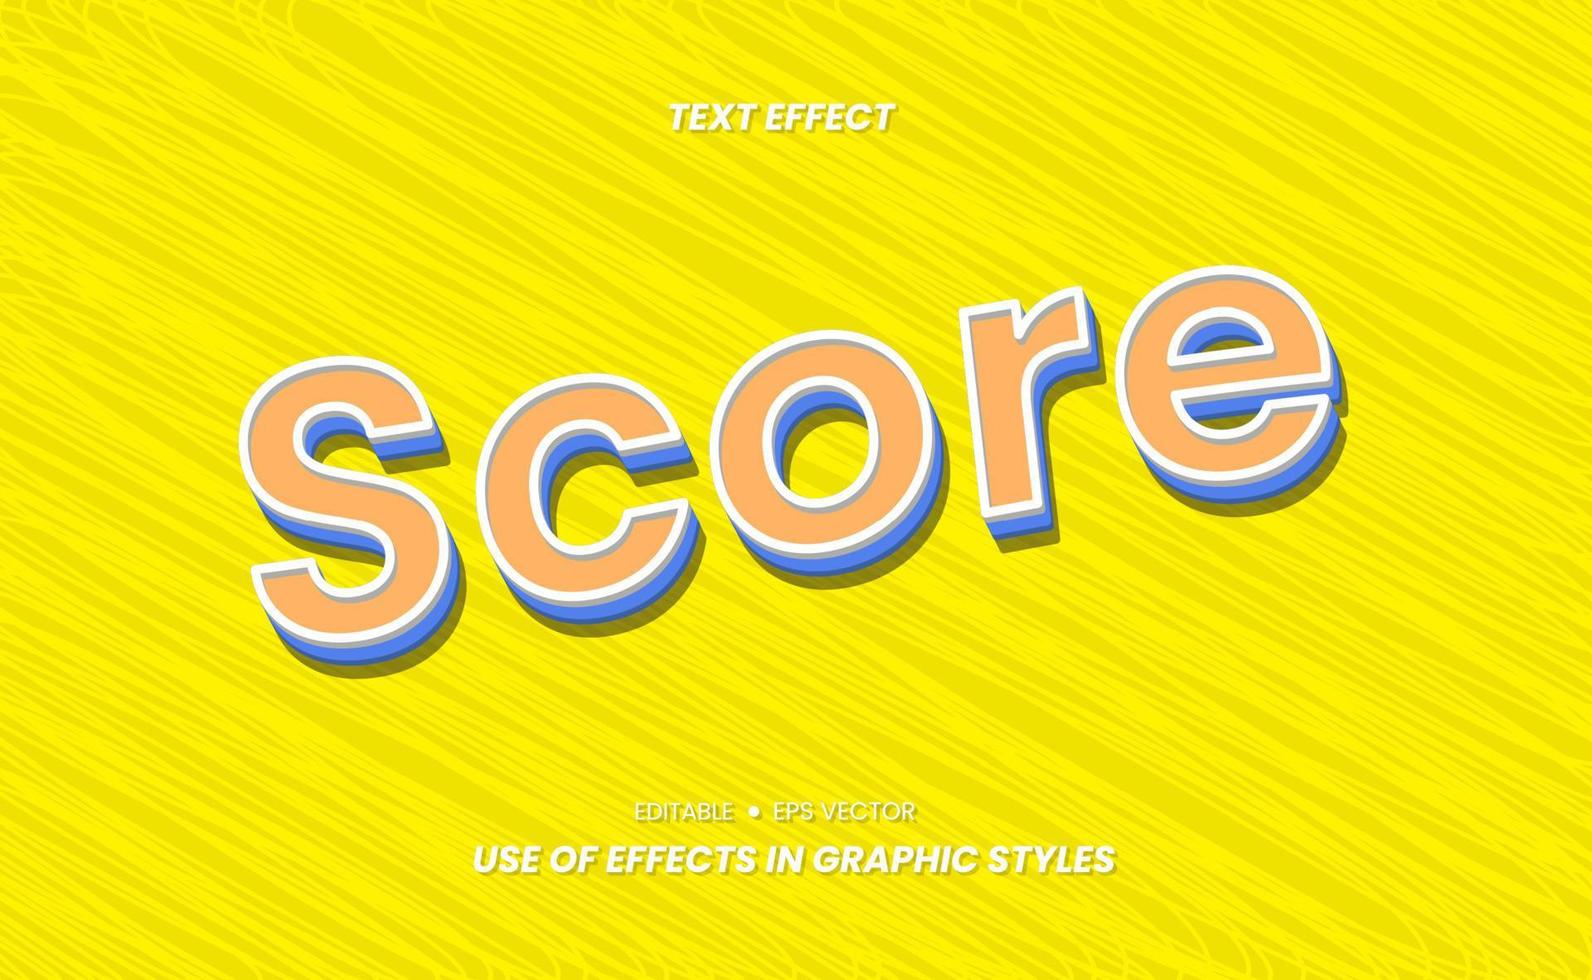 3D Text Effects with the word Score and Easy to Edit vector